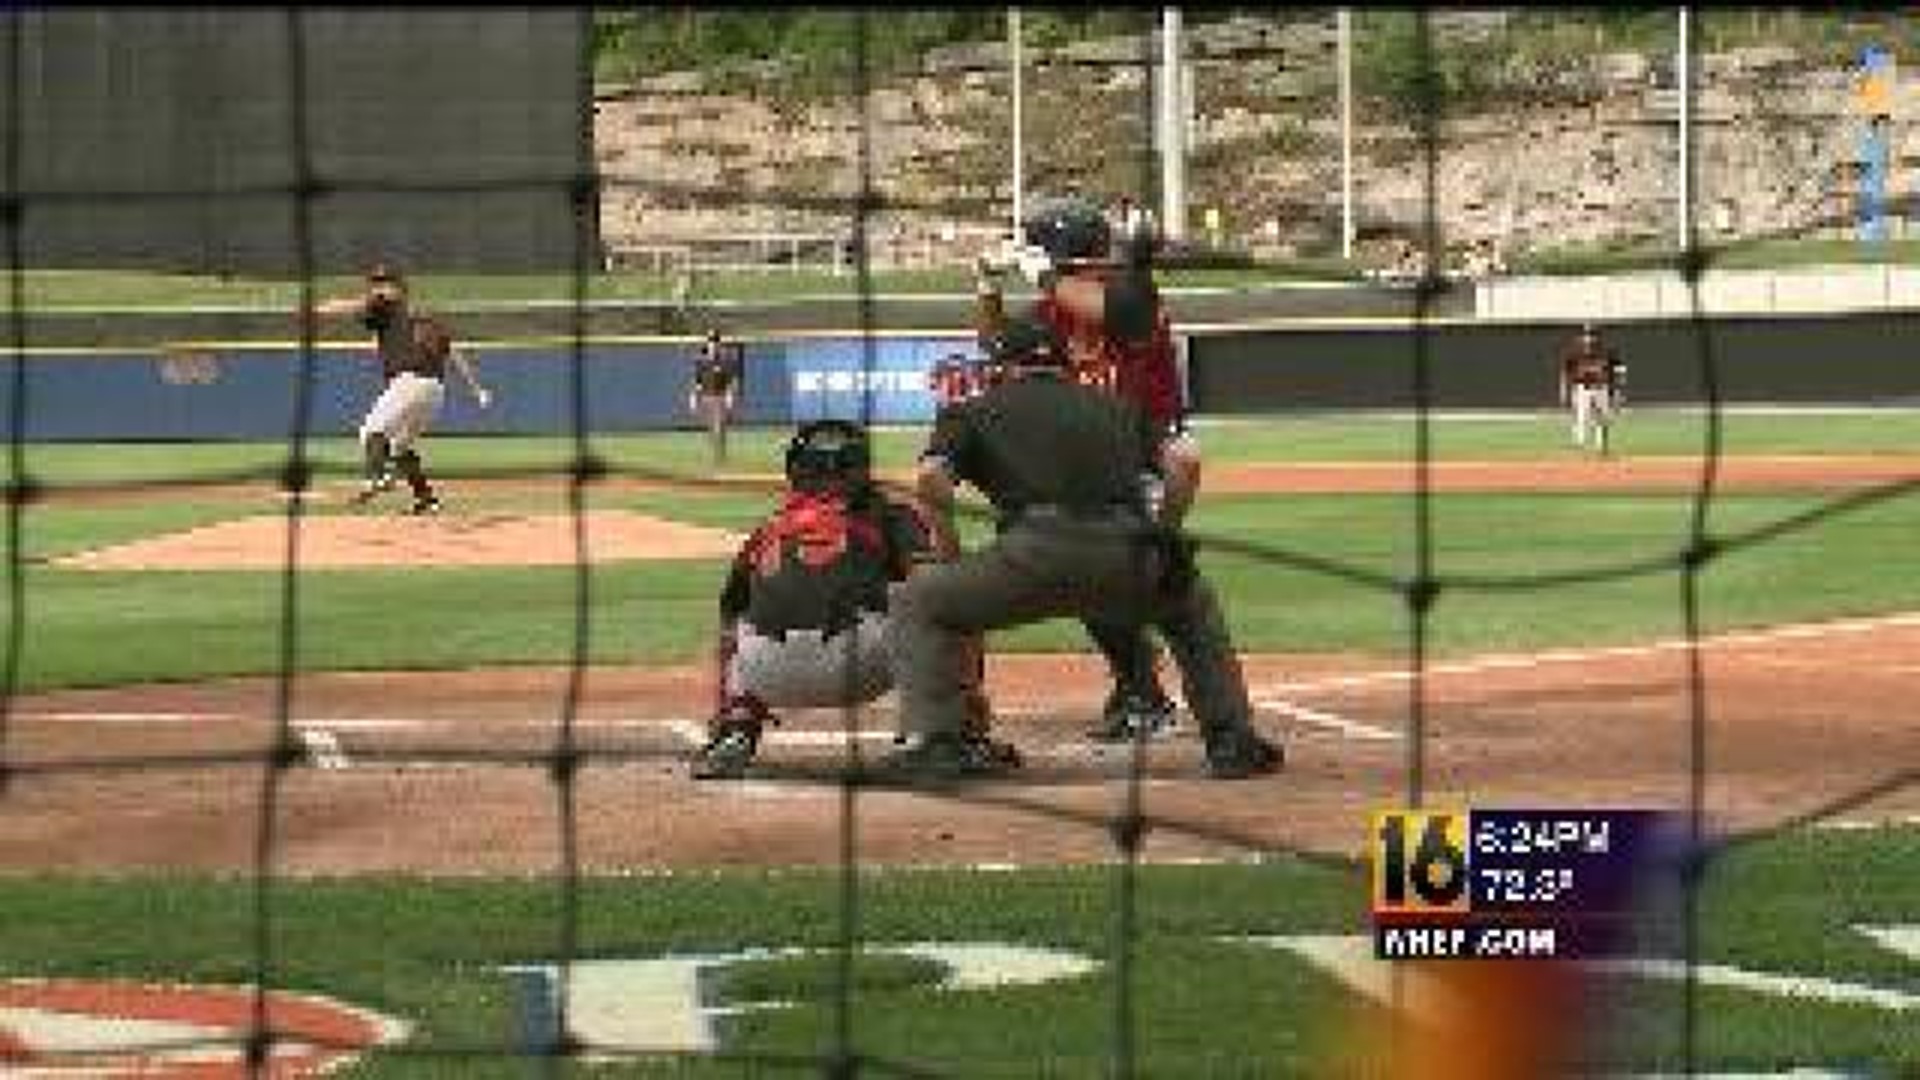 RailRiders Looking For Wins